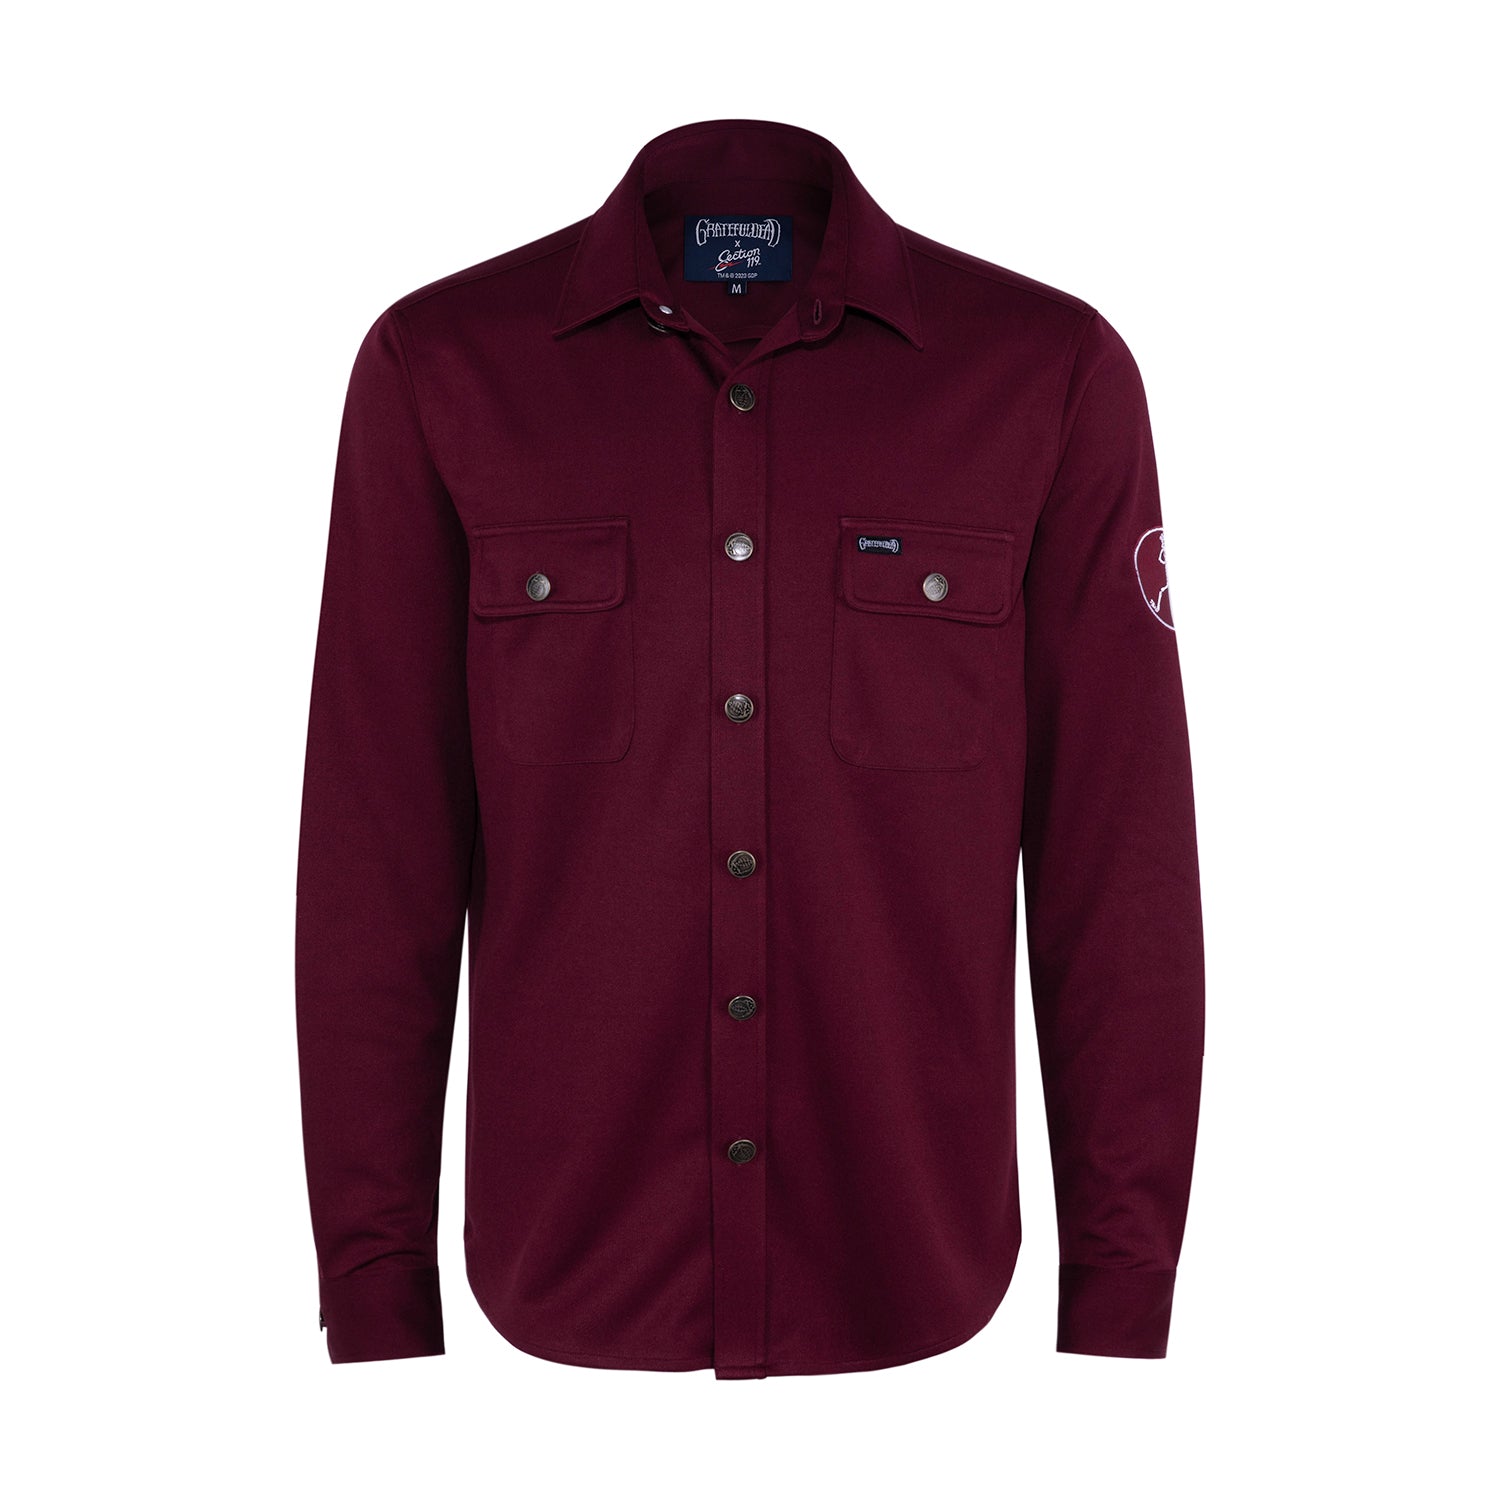 Grateful Dead Long Sleeve Button Down Sweater Maroon with Skeleton - Section 119